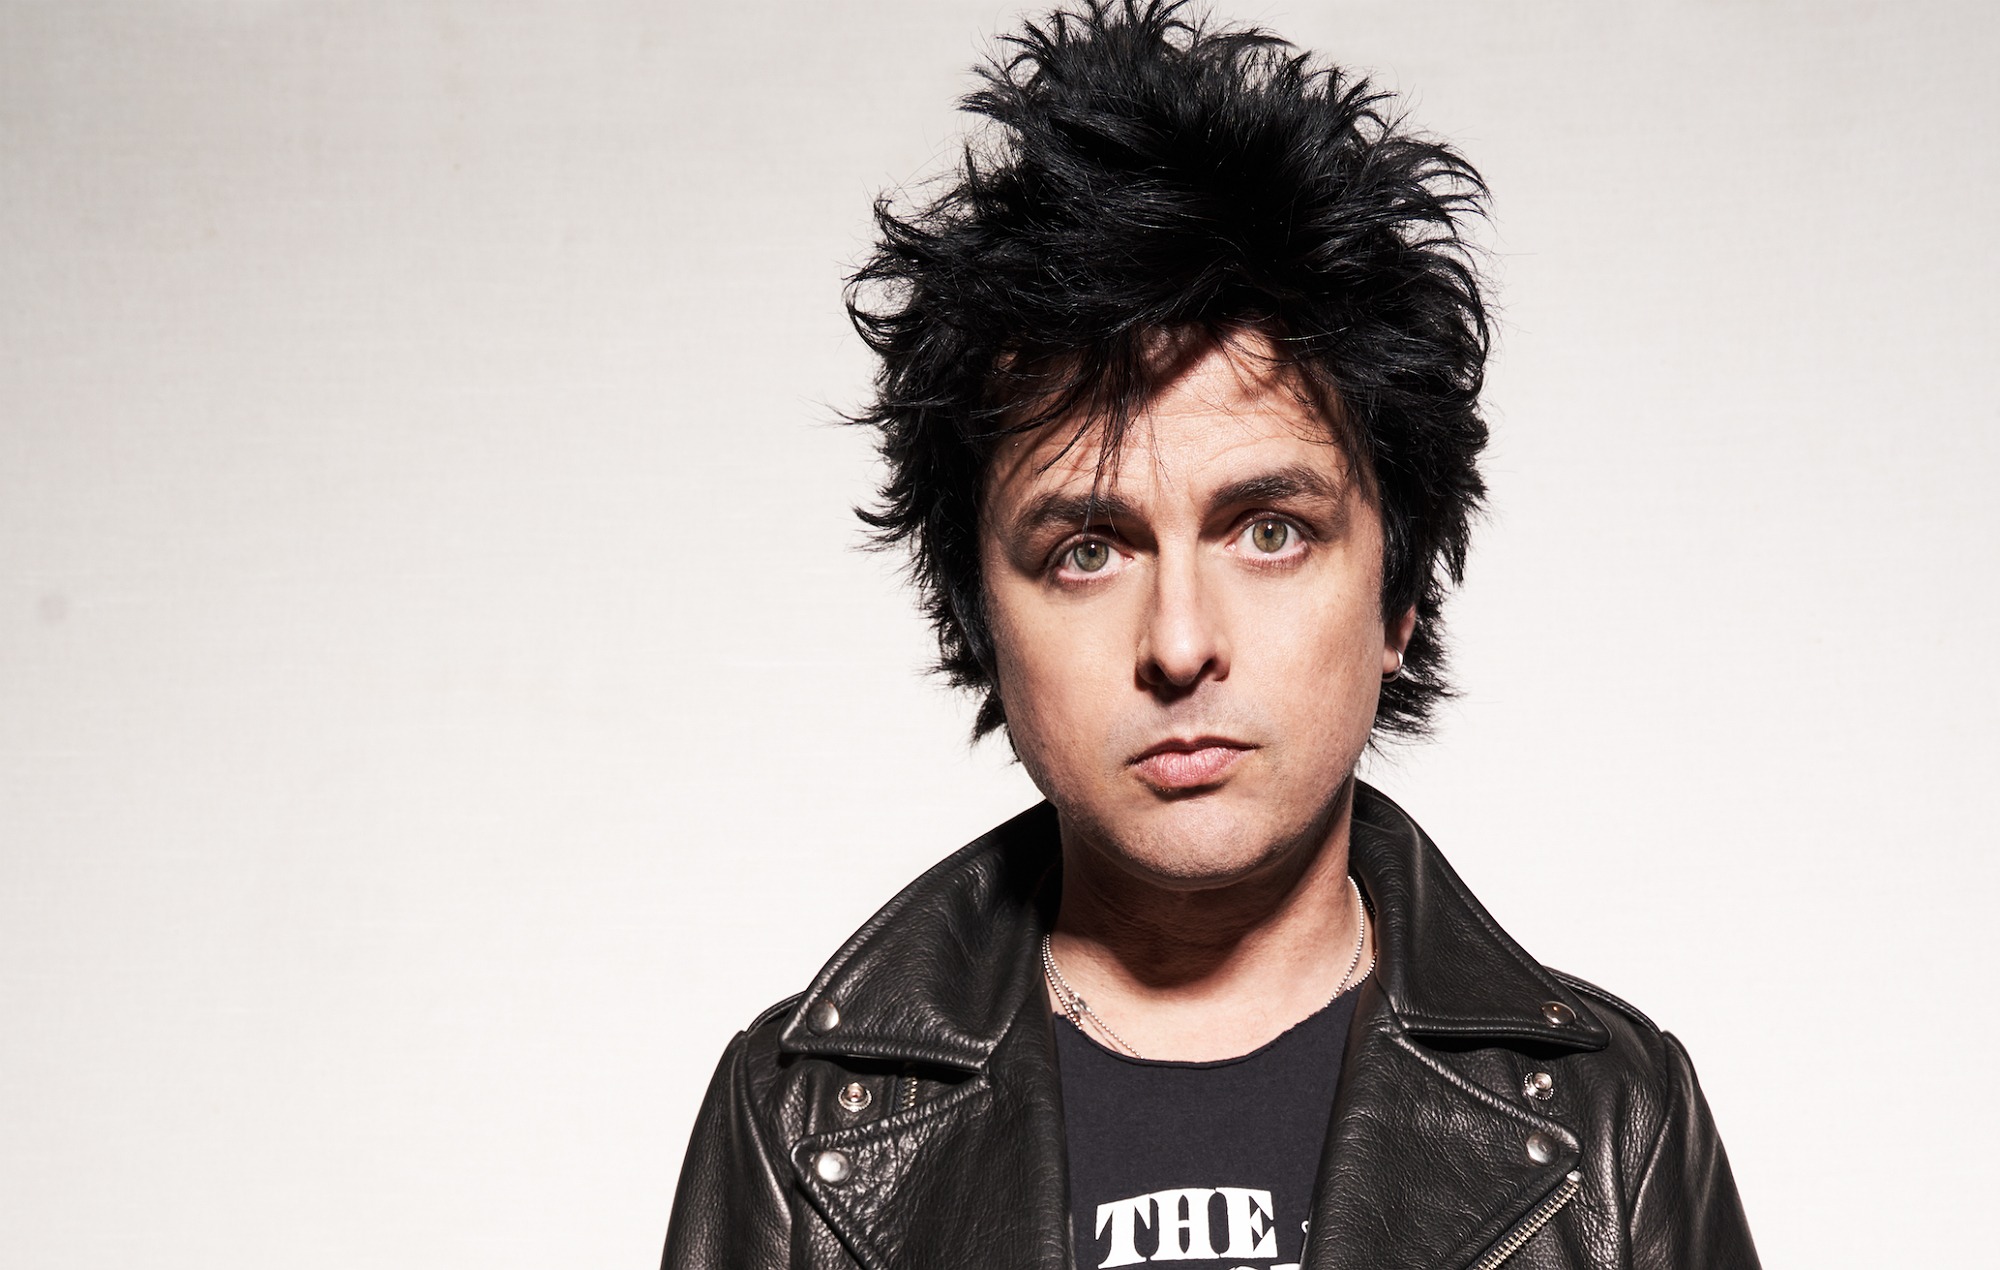 Green Day’s Billie Joe Armstrong: “Donald Trump is holding half of the country hostage”